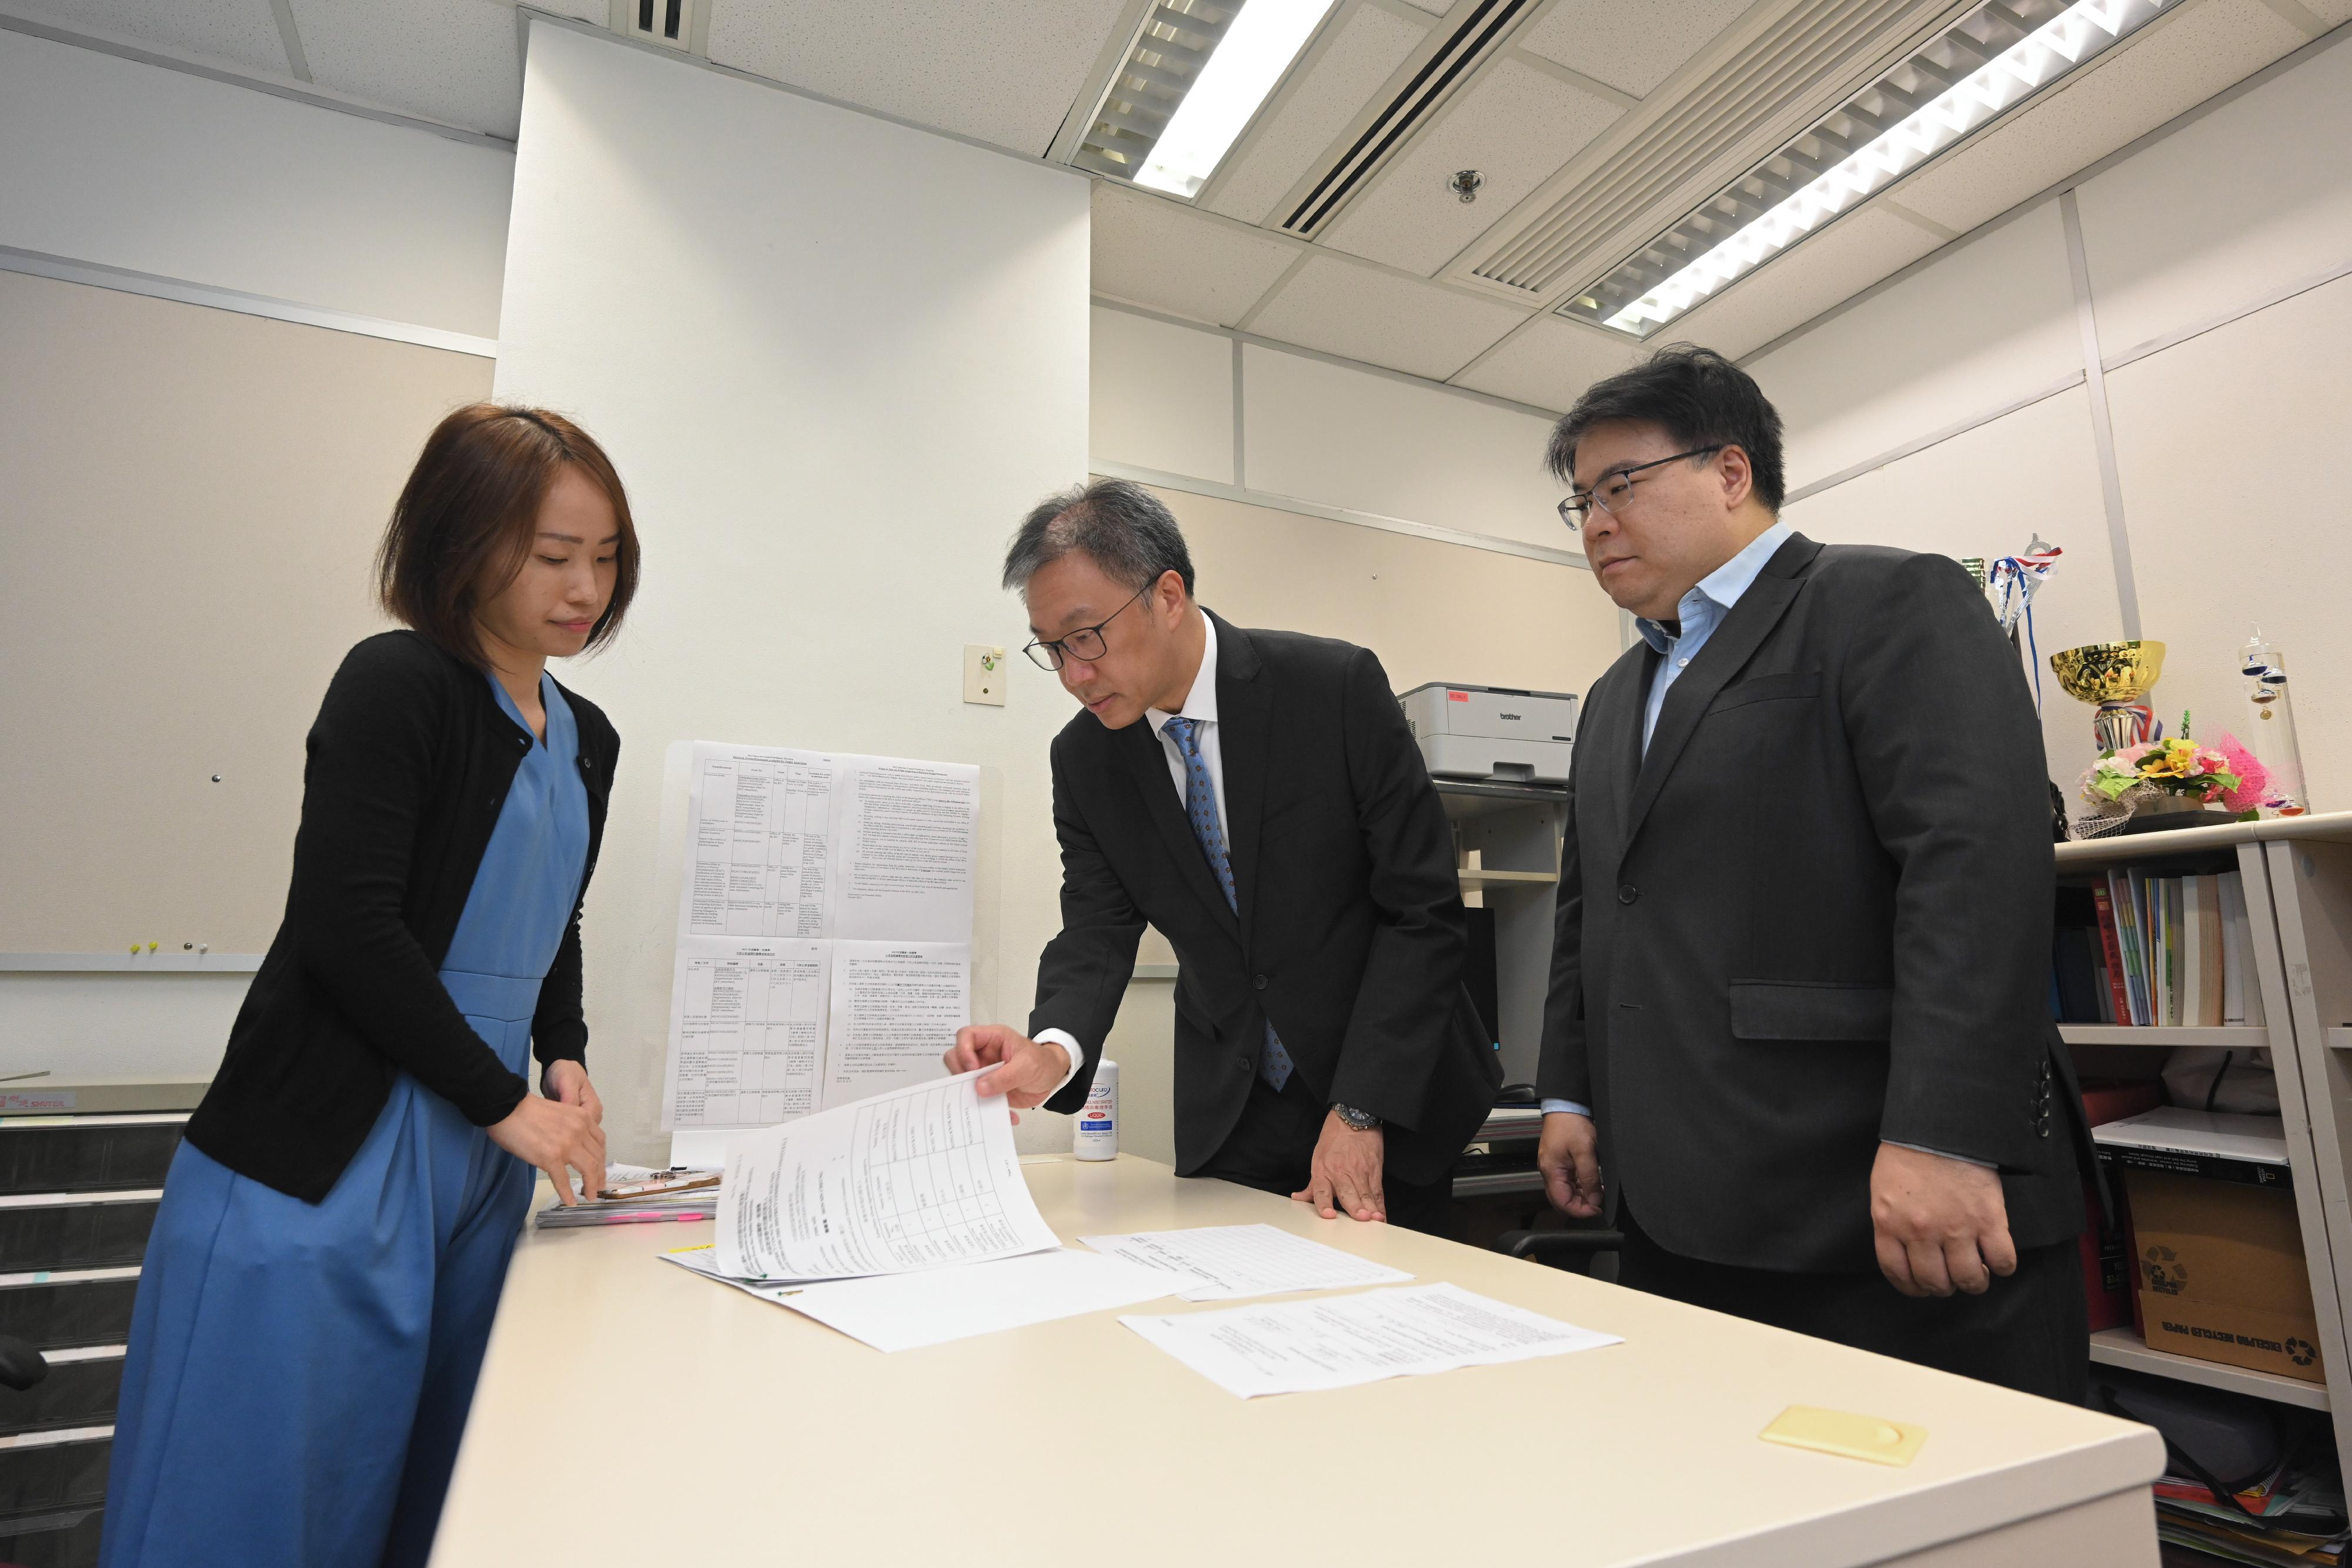 The Chairman of the Election Affairs Commission, Mr Justice David Lok, today (October 16) visits the Returning Officer's office at the Central and Western District Office where nomination forms for the 2023 District Council Ordinary Election will be received. Photo shows Mr Justice Lok (centre), accompanied by the Returning Officer of the Central and Western District, Mr David Leung (right), inspecting the arrangements for public inspection of the nomination forms.
